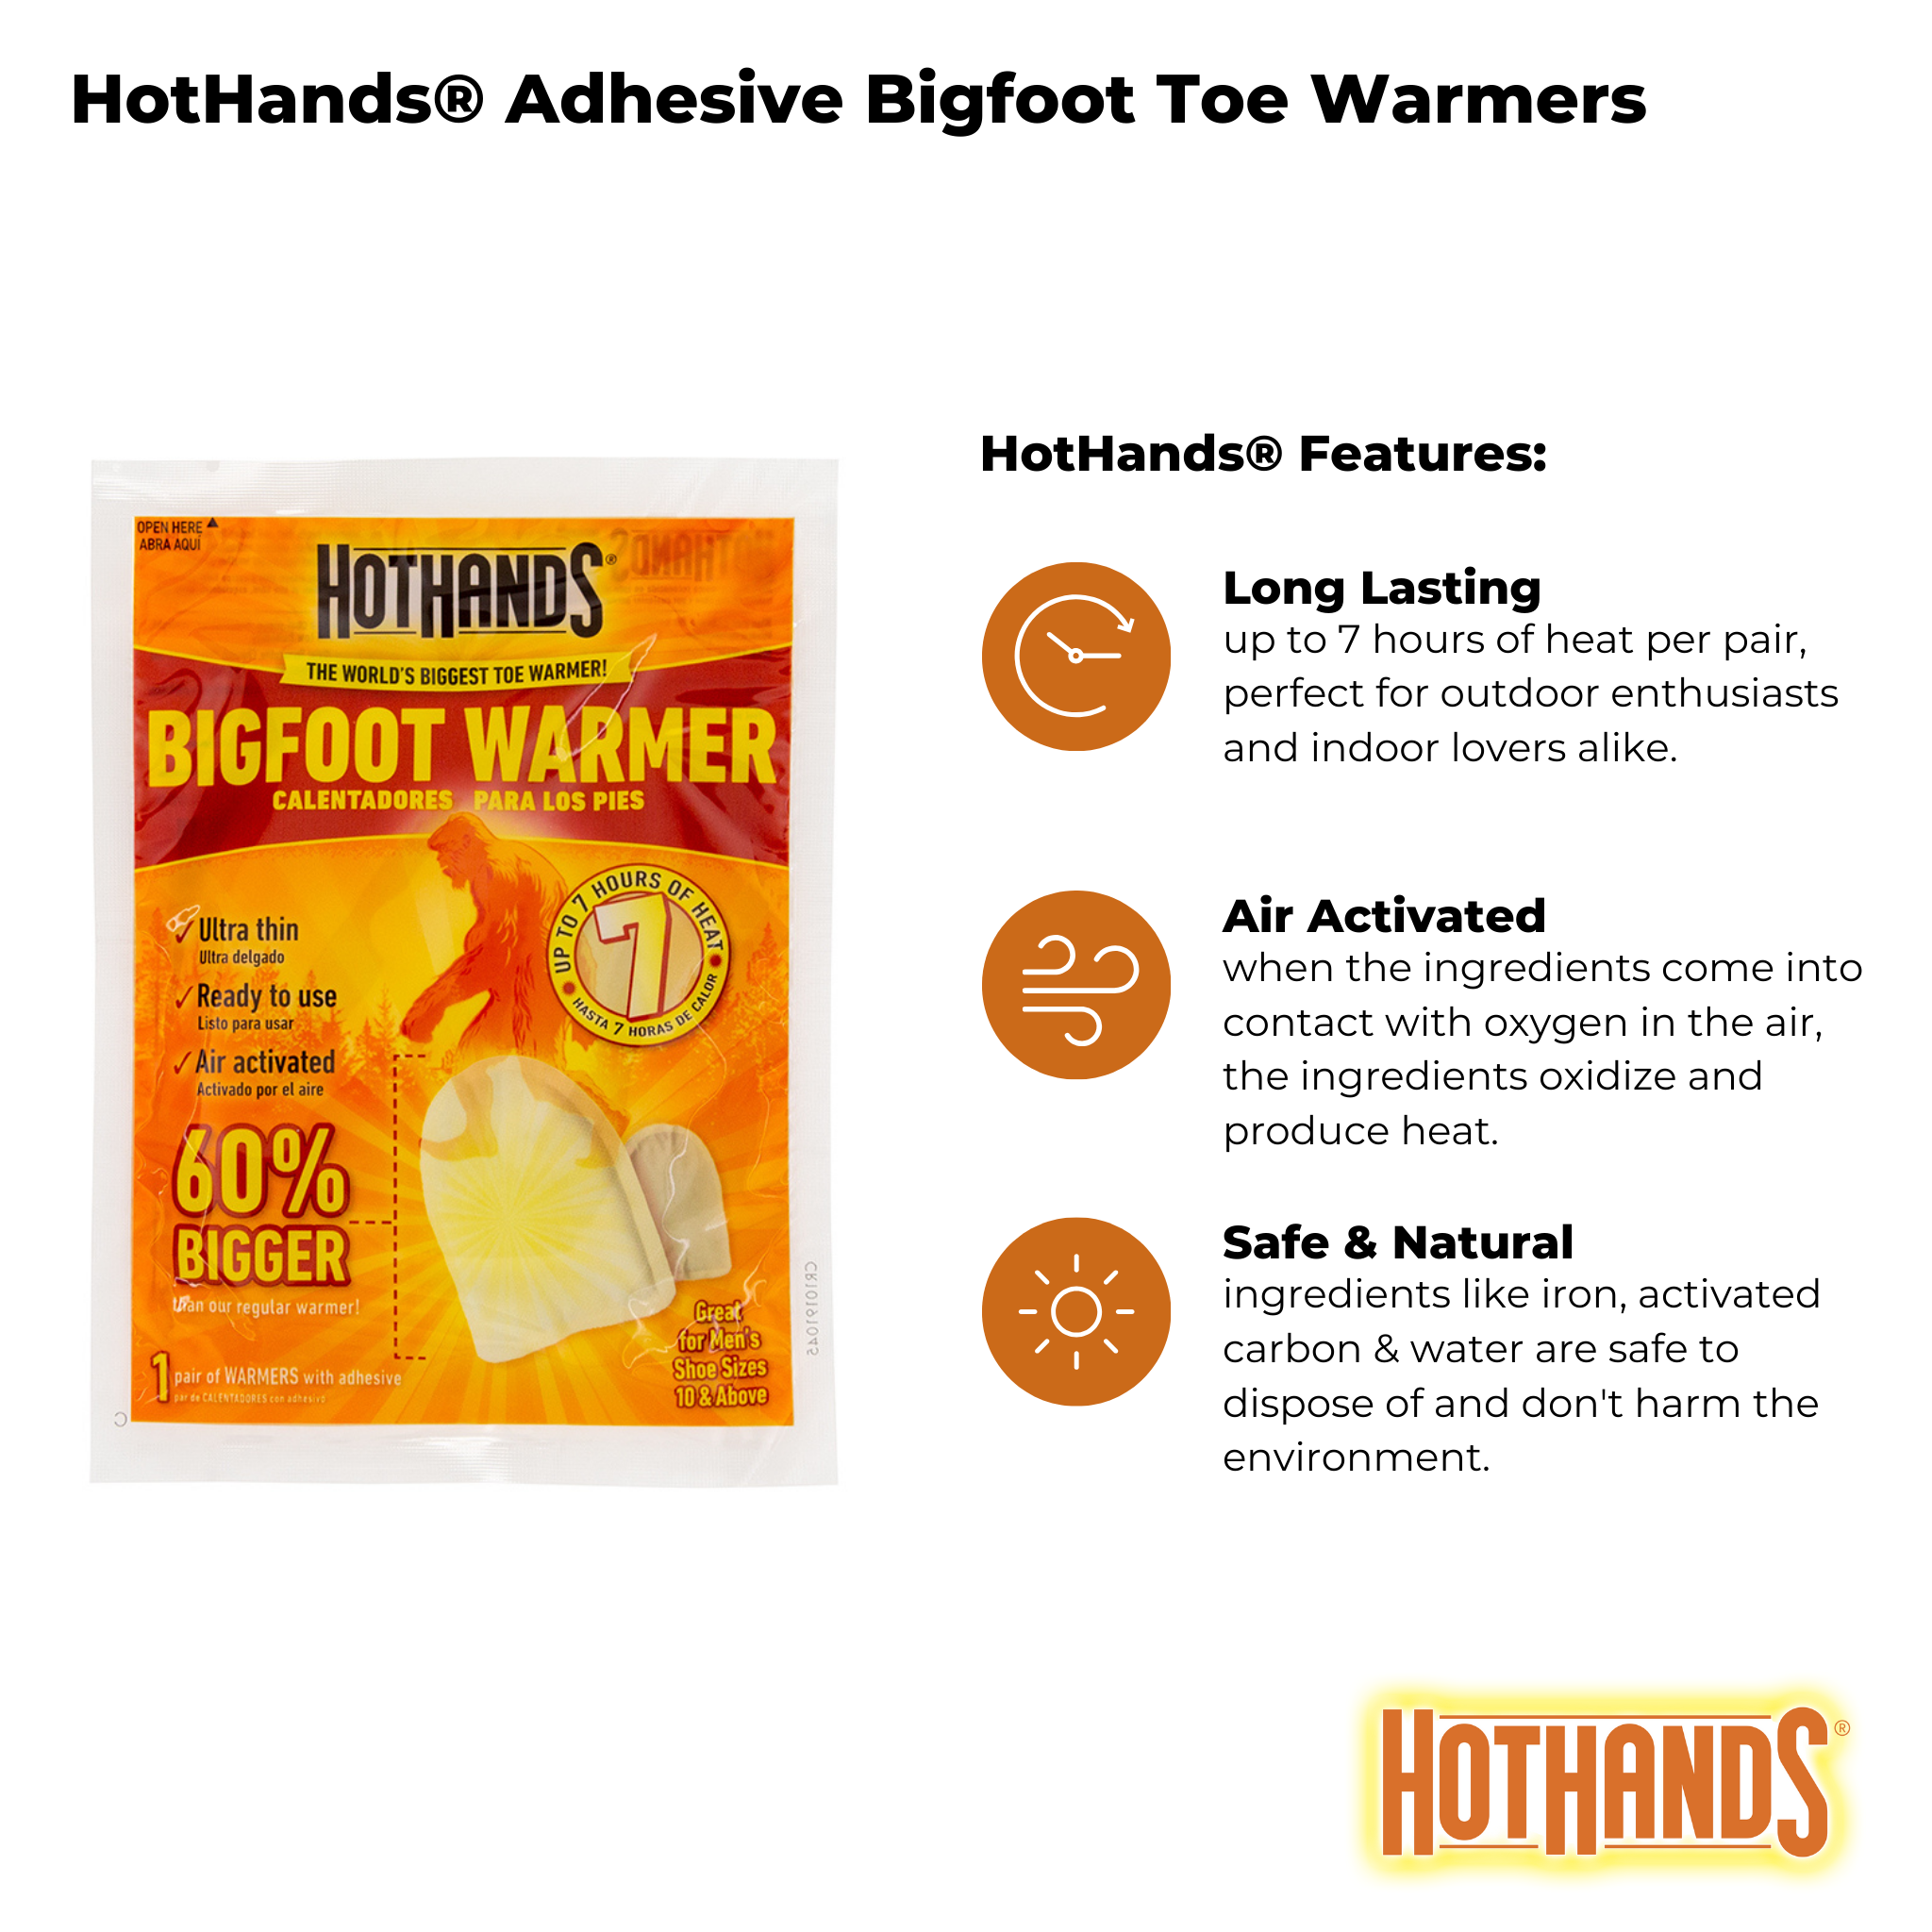 Hothands – Everyday Warmth